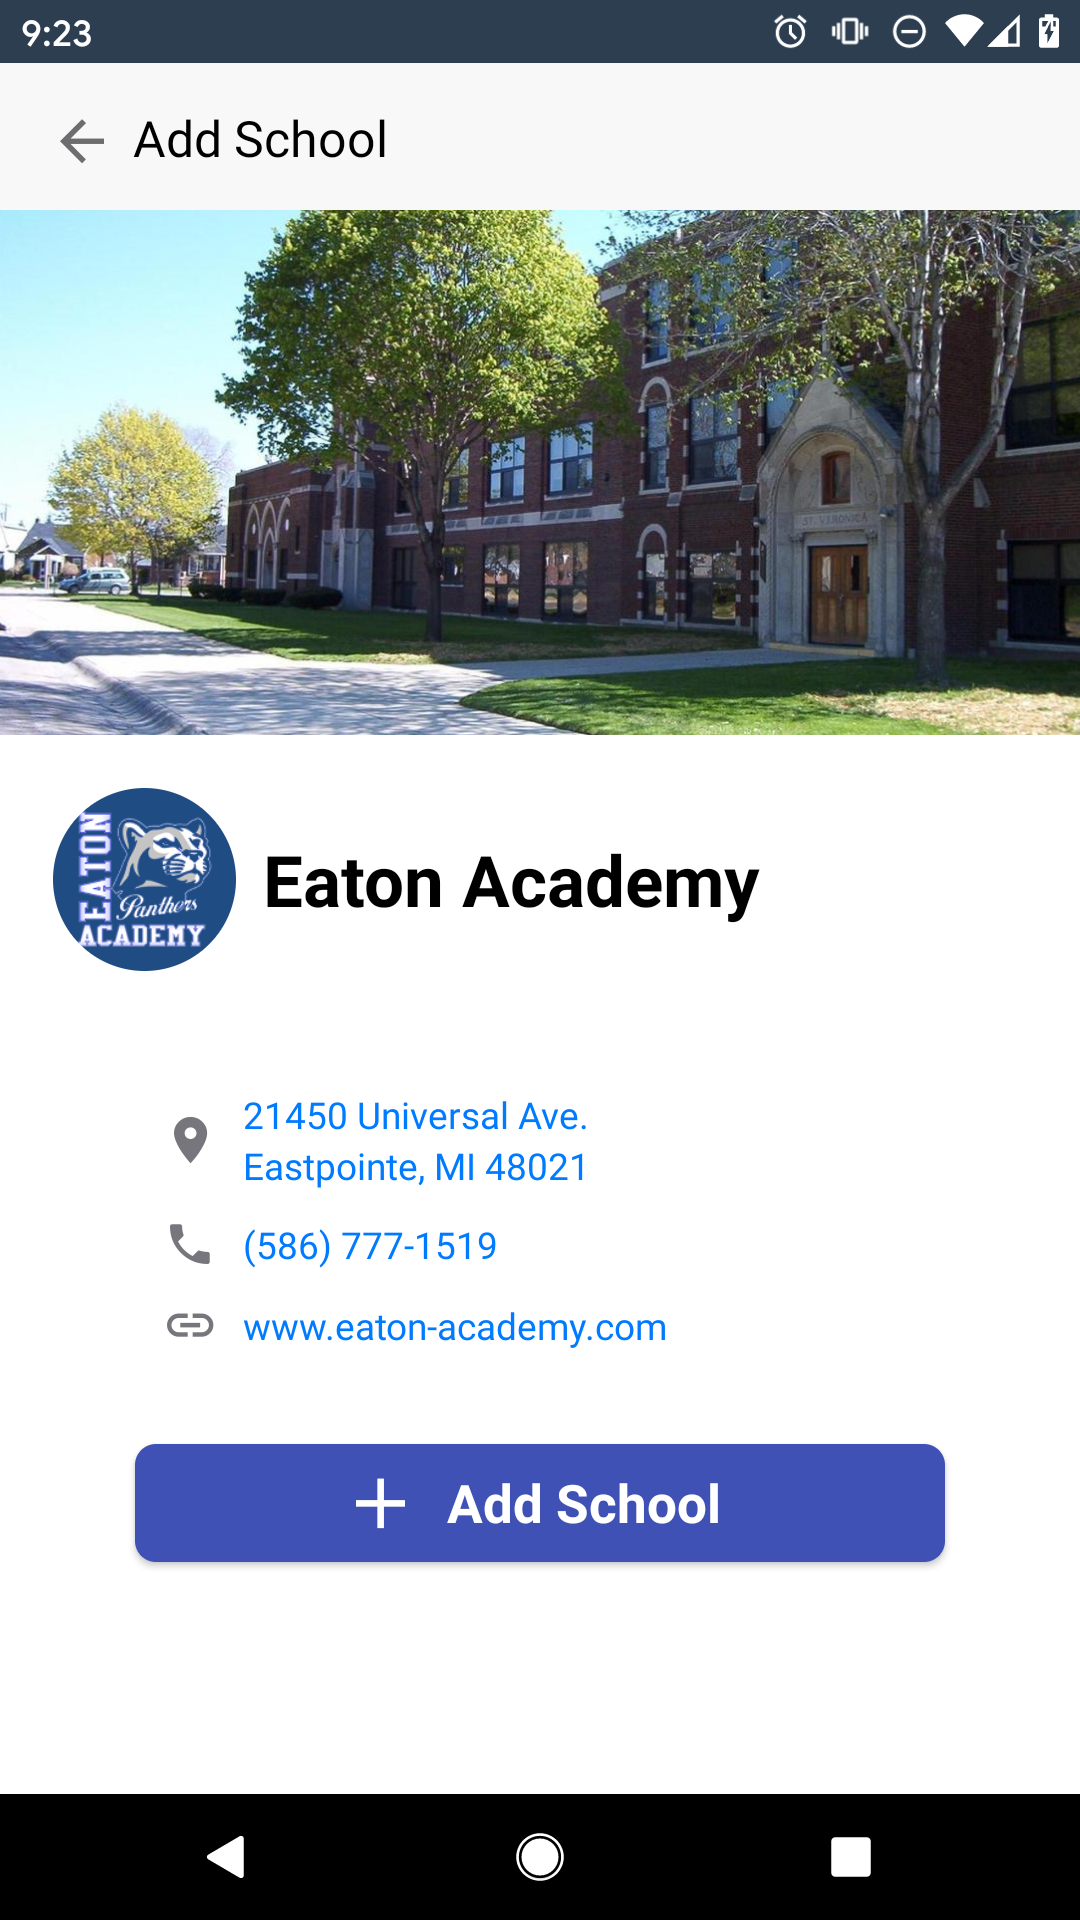 Eaton Academy's page on the School News App by Edlio